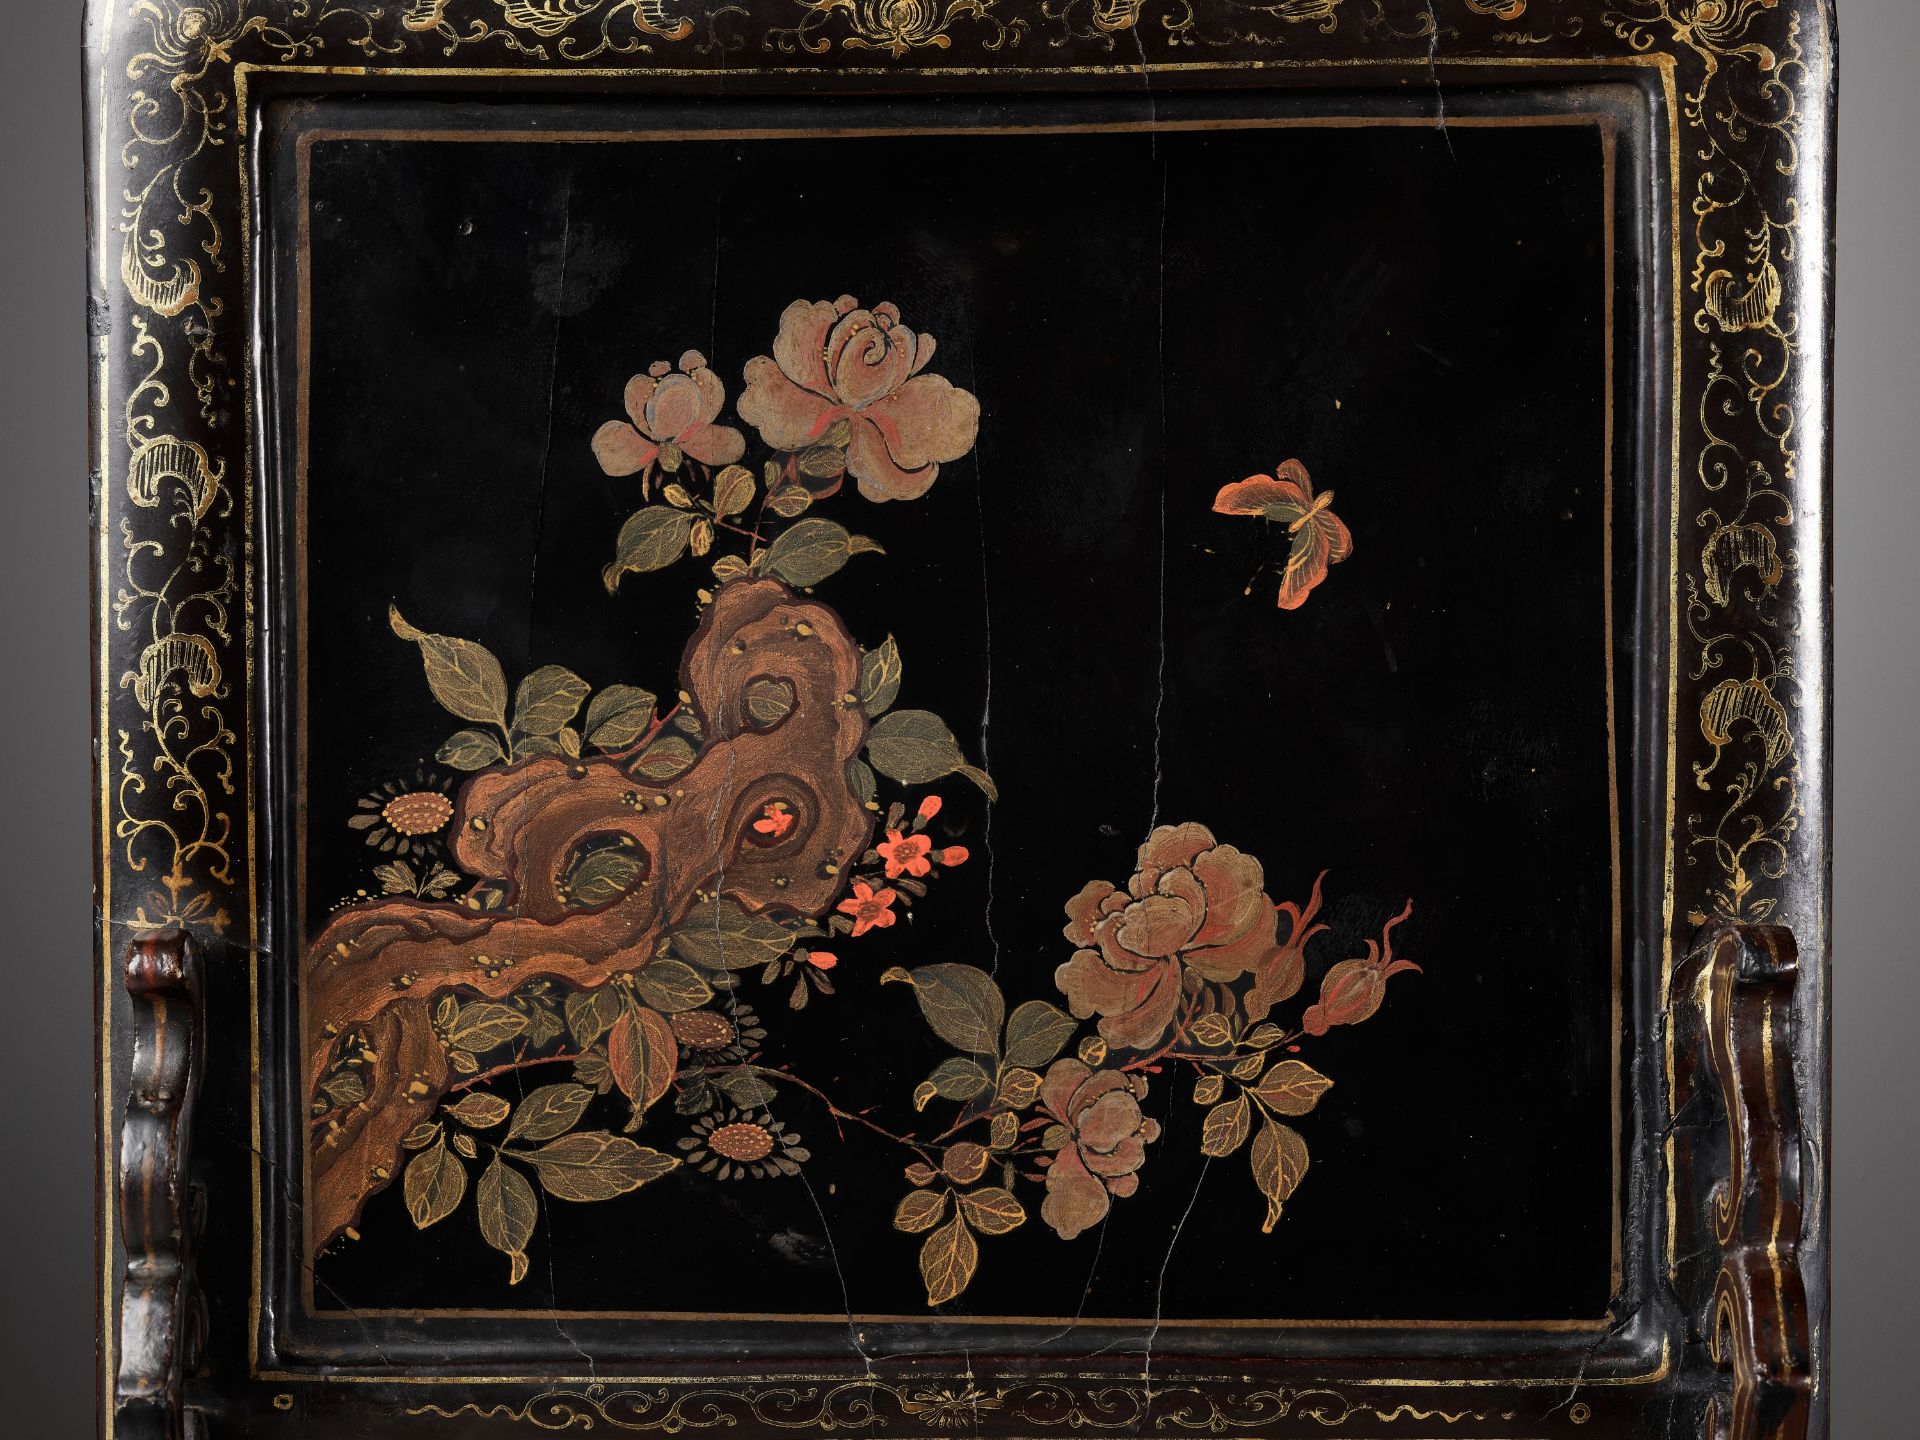 A POLYCHROME AND GILT-LACQUERED 'FOREIGNER' TABLE SCREEN, KANGXI PERIOD - Image 9 of 14